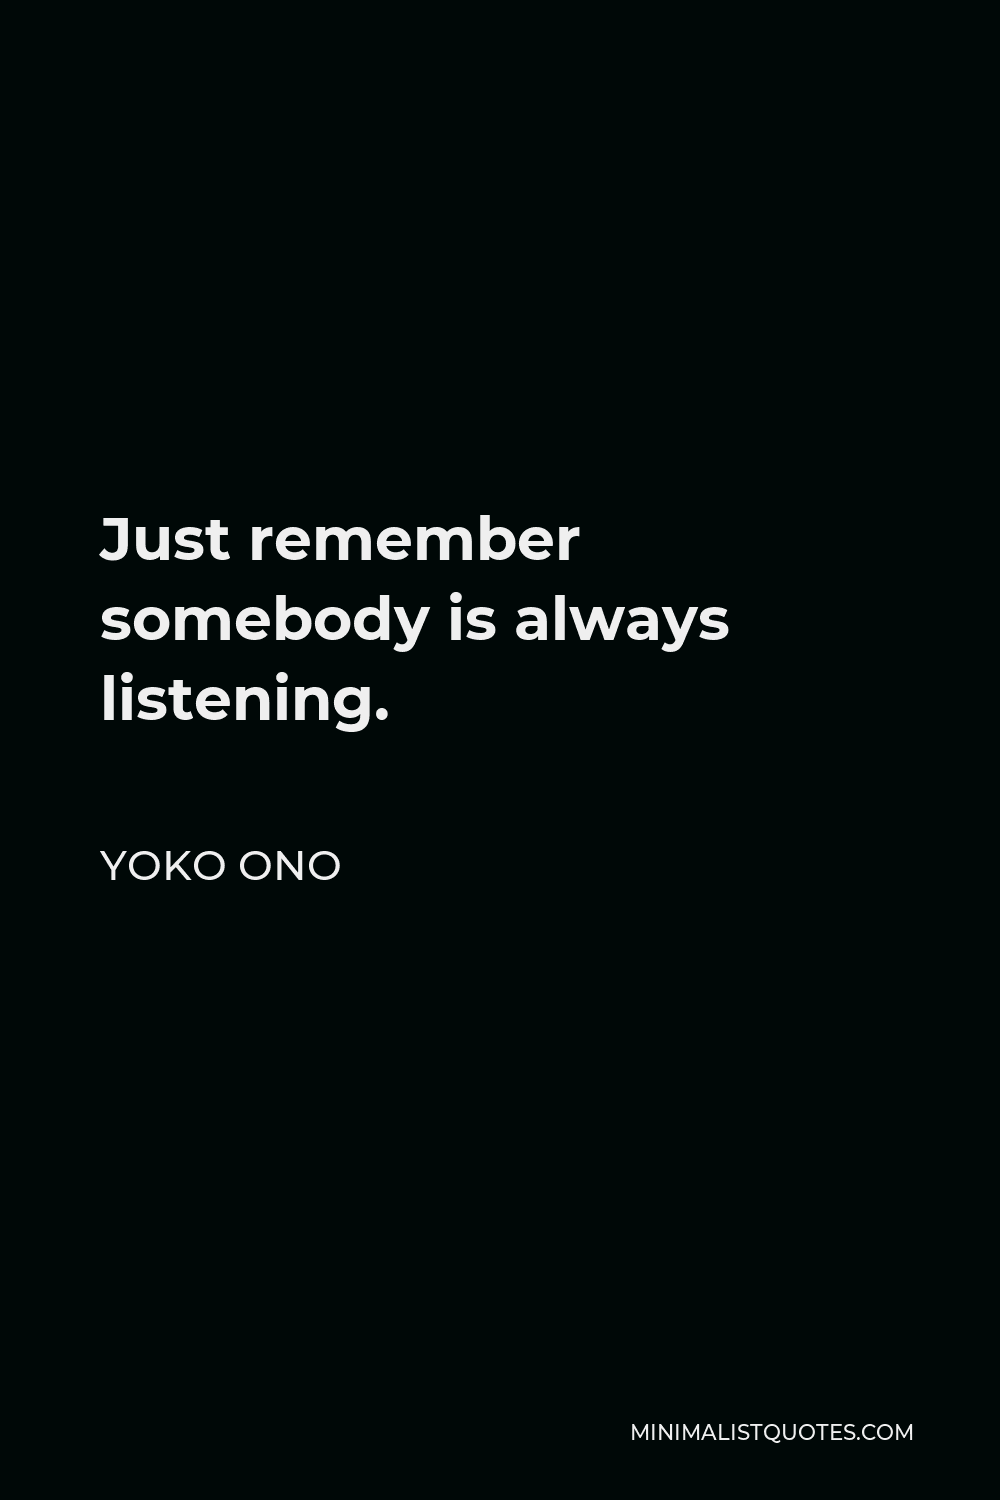 Yoko Ono Quote - Just remember somebody is always listening.